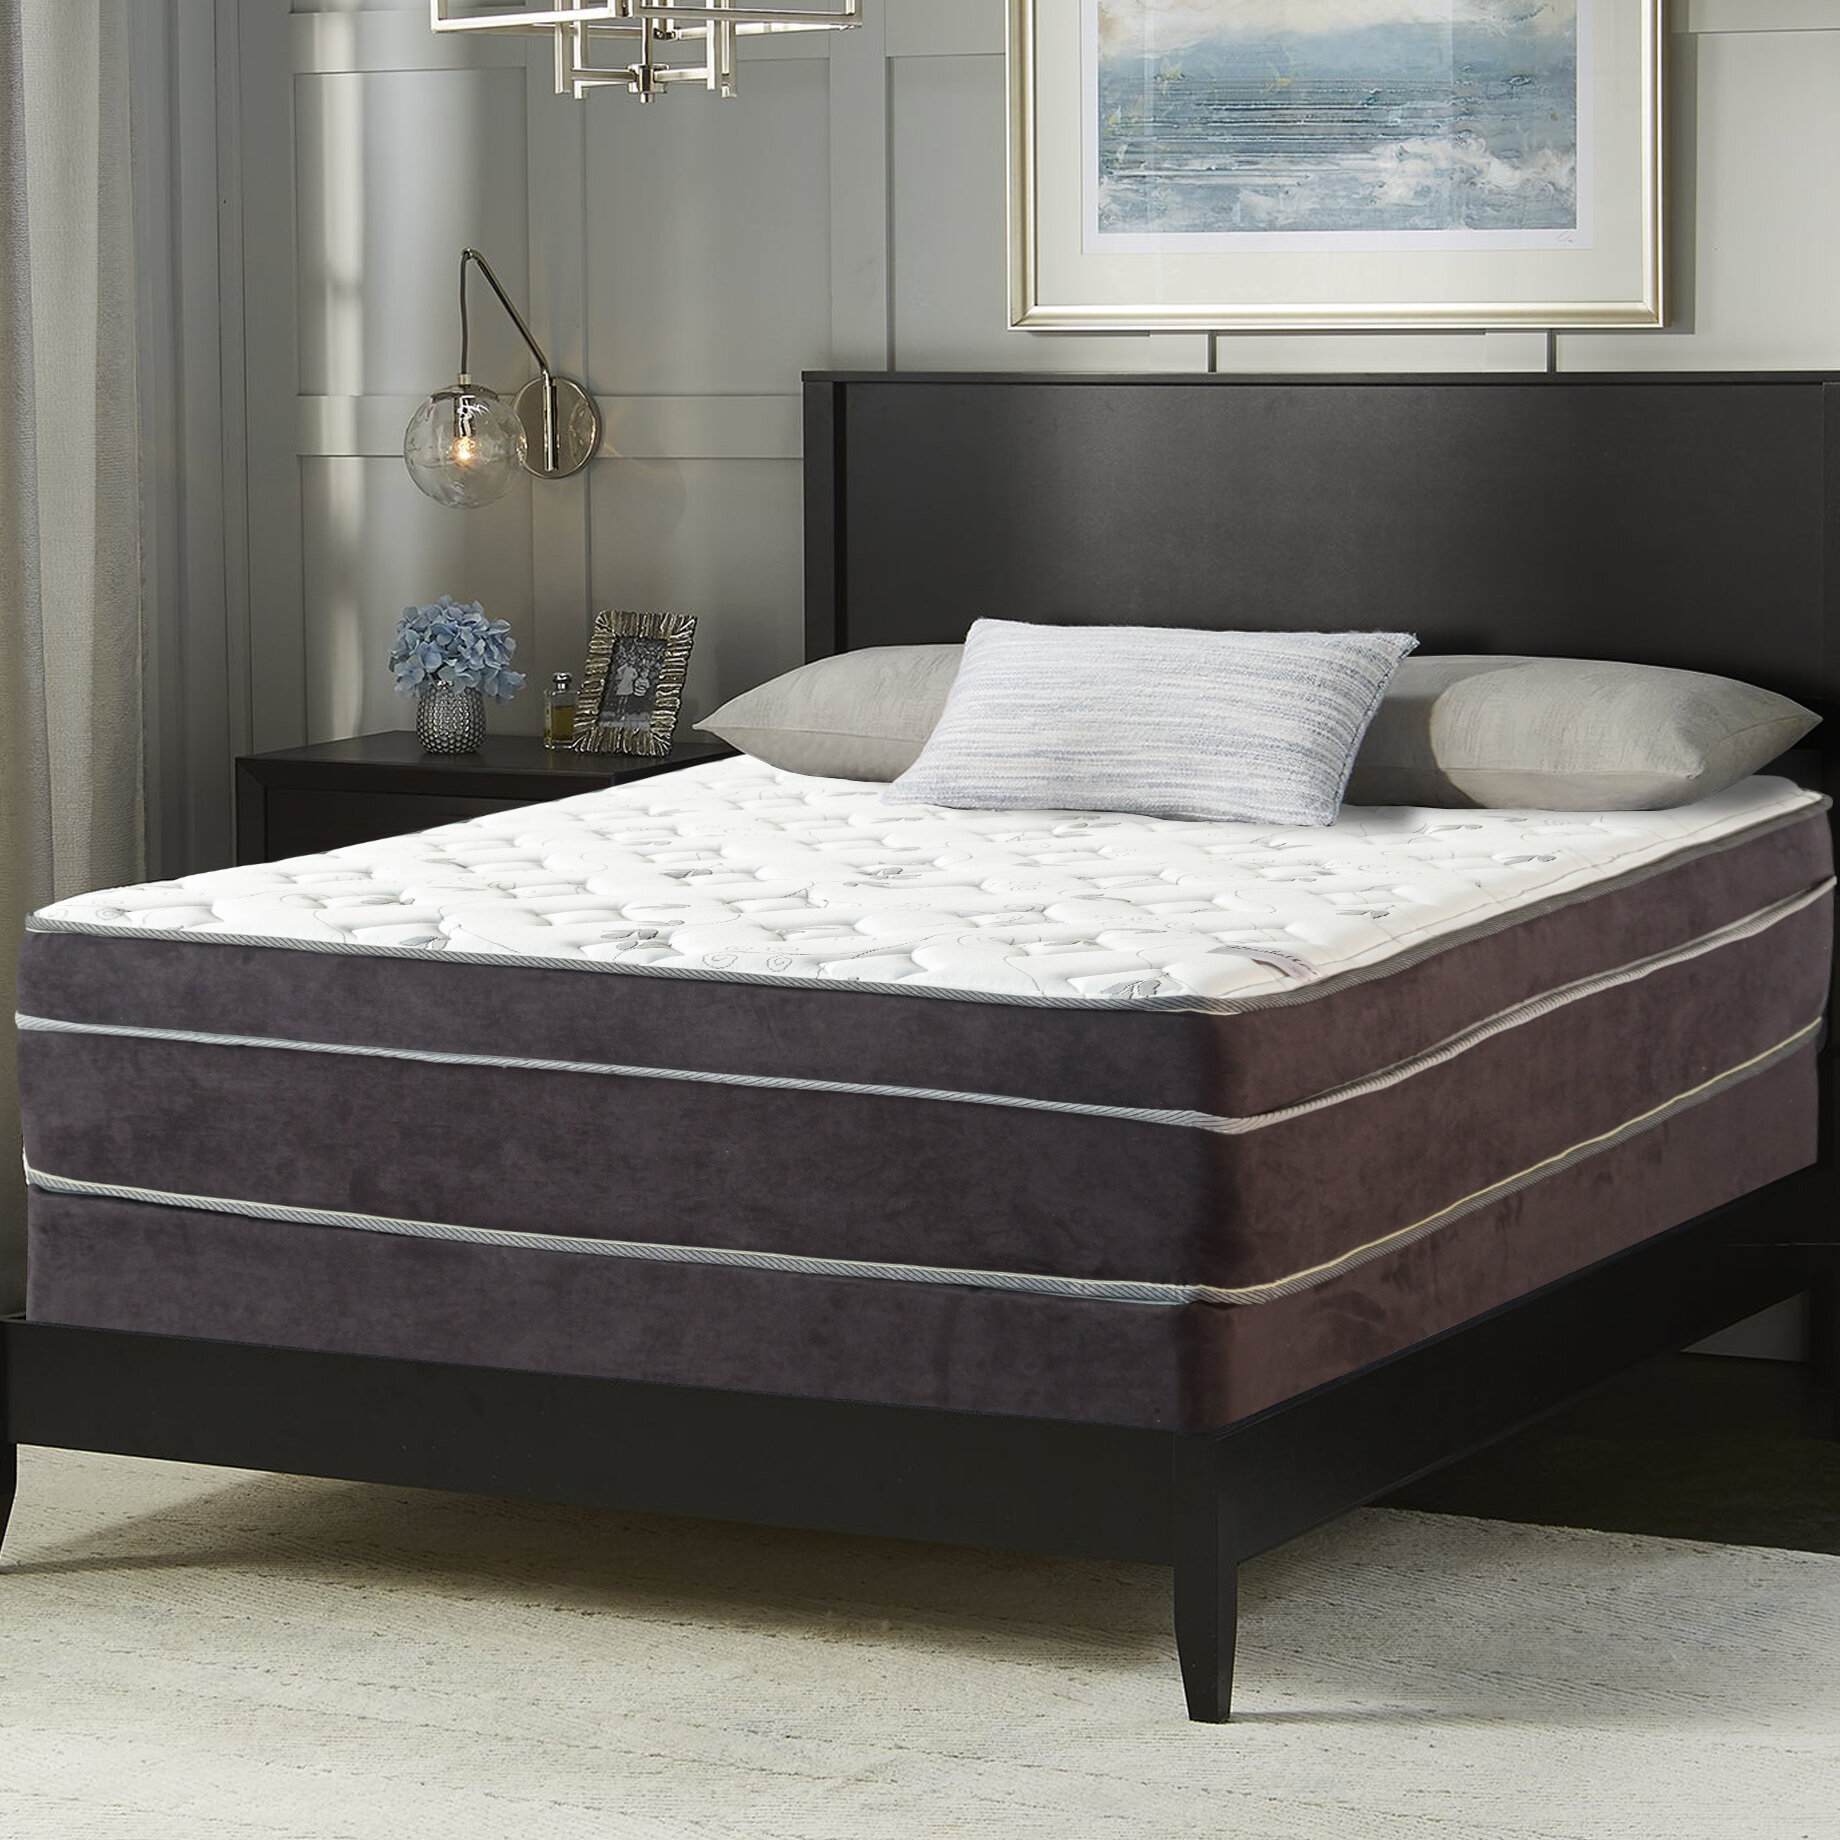 Nutan 11-Inch Medium plush Foam Encased Eurotop Pillowtop Innerspring Fully Assembled Mattress And 8-Inch Wood Box Spring//Foundation Set Good For The Back,Twin